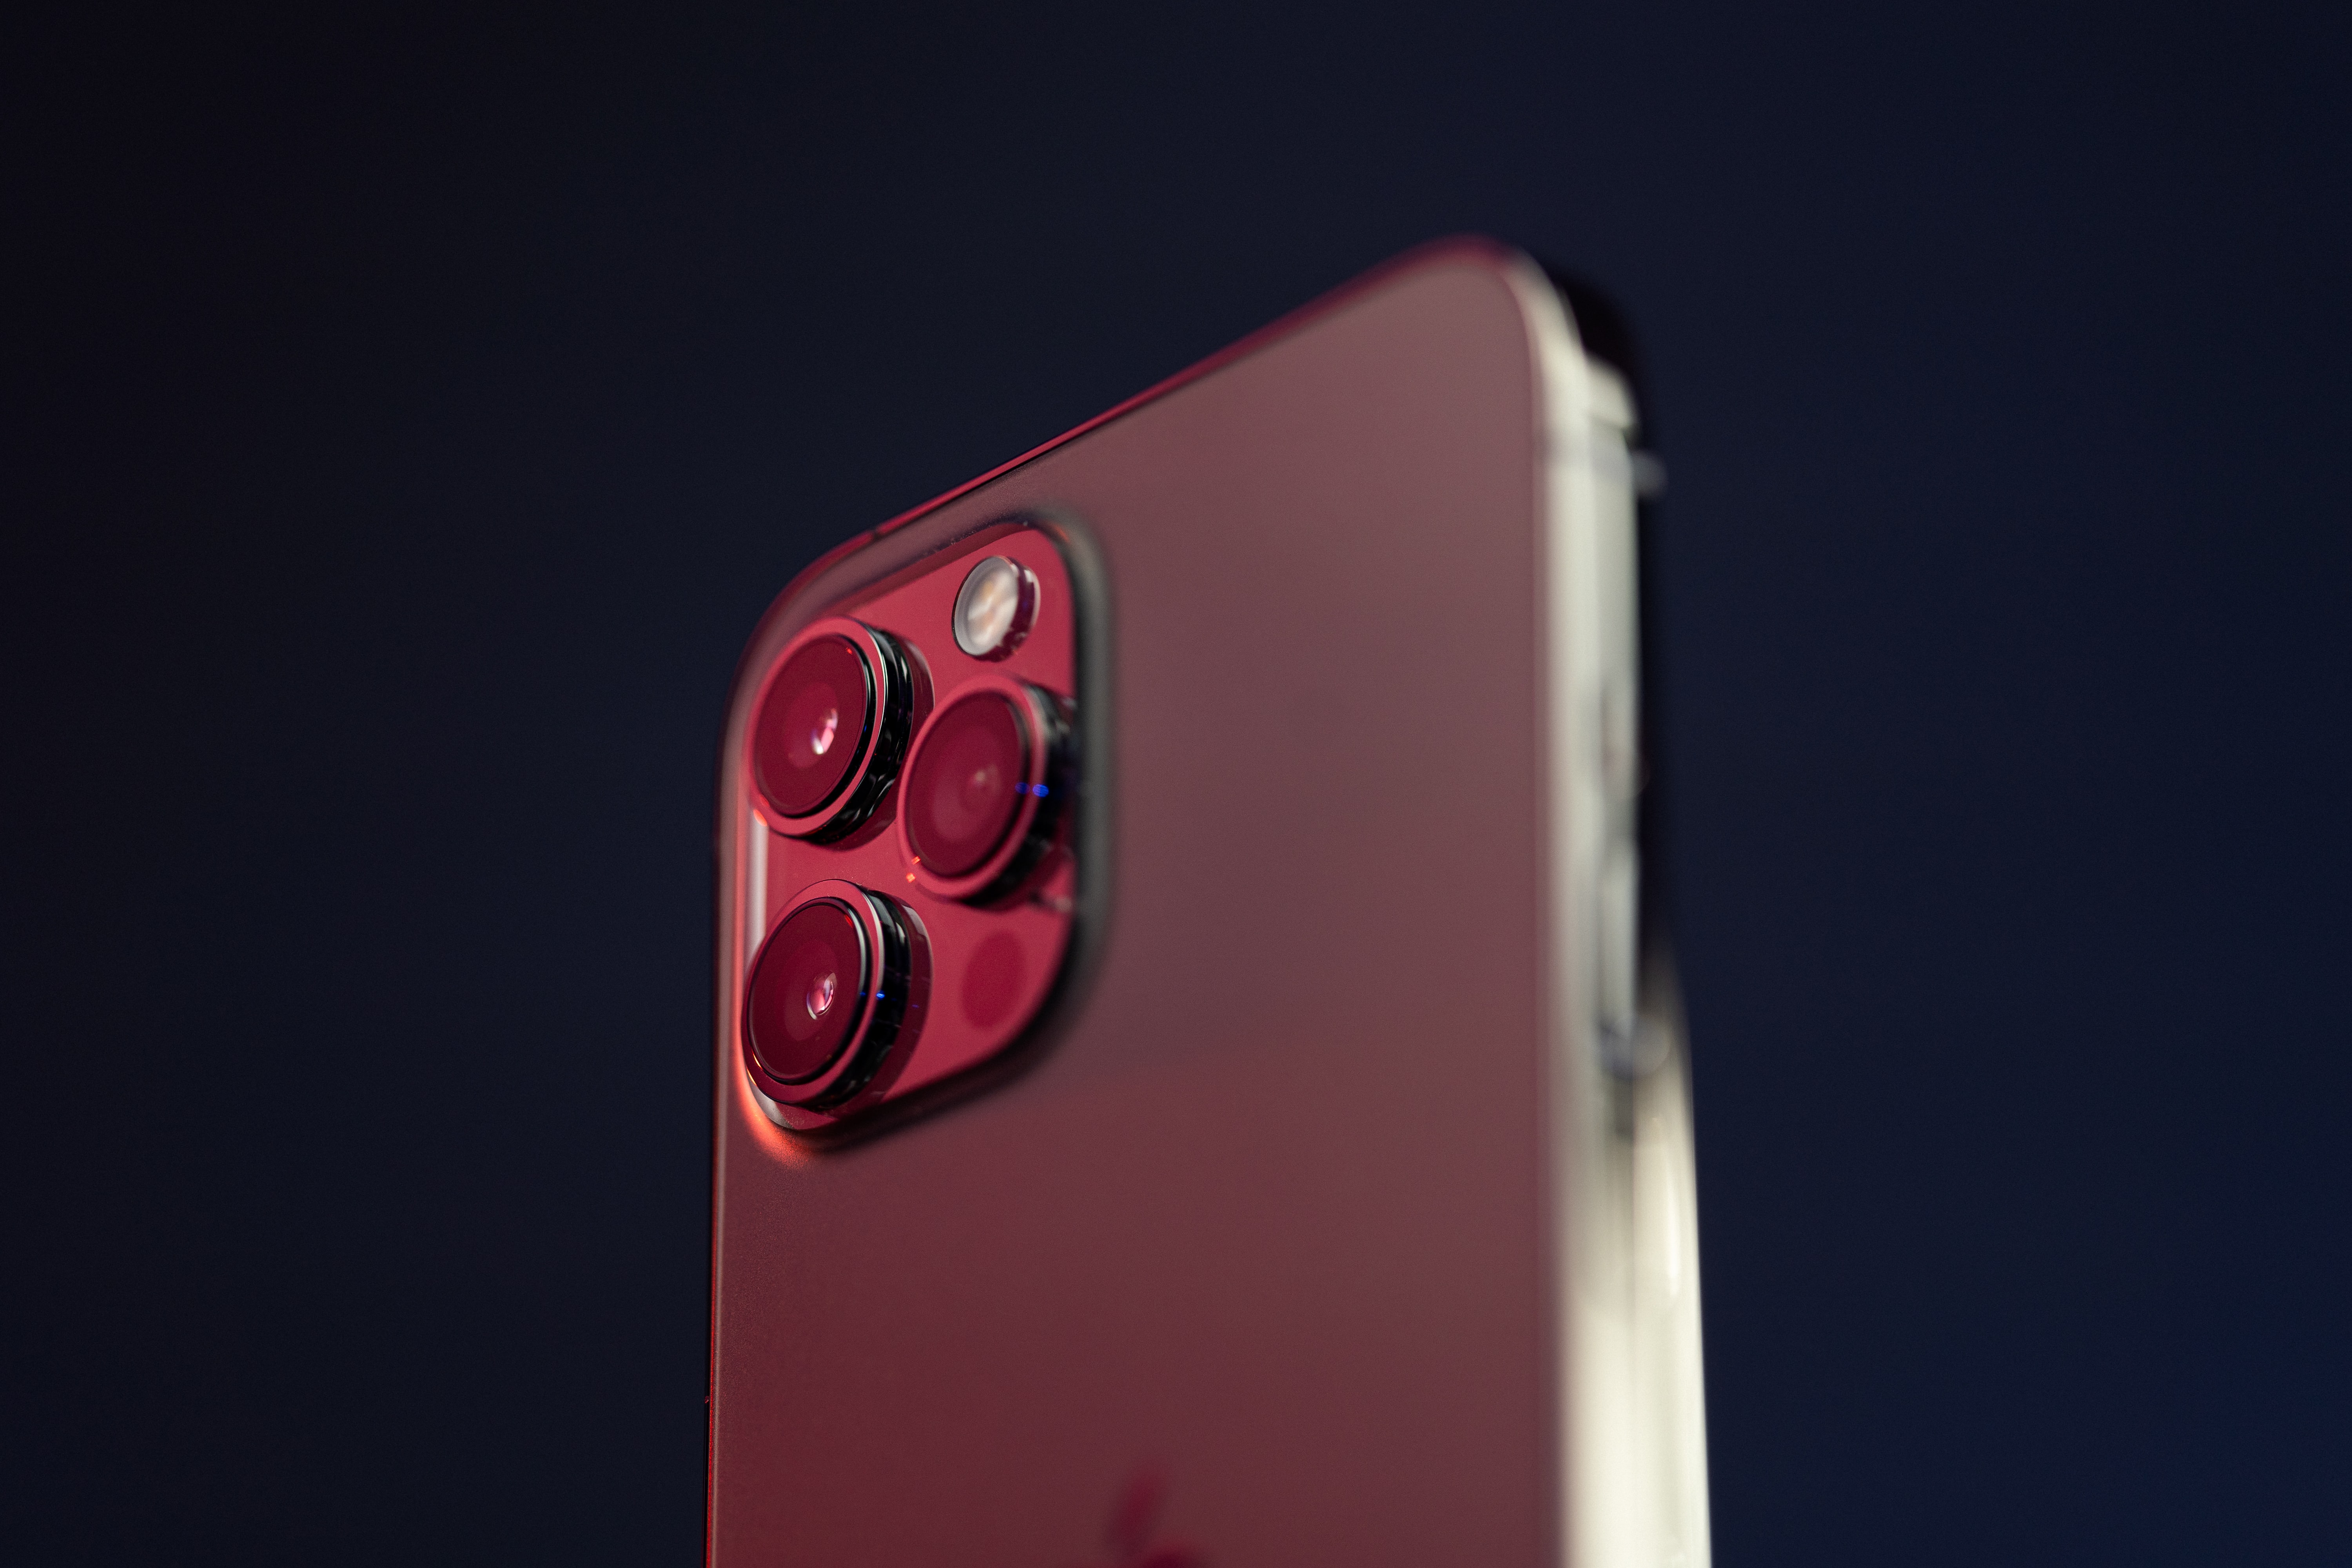 Back of an iPhone with three camera lenses.